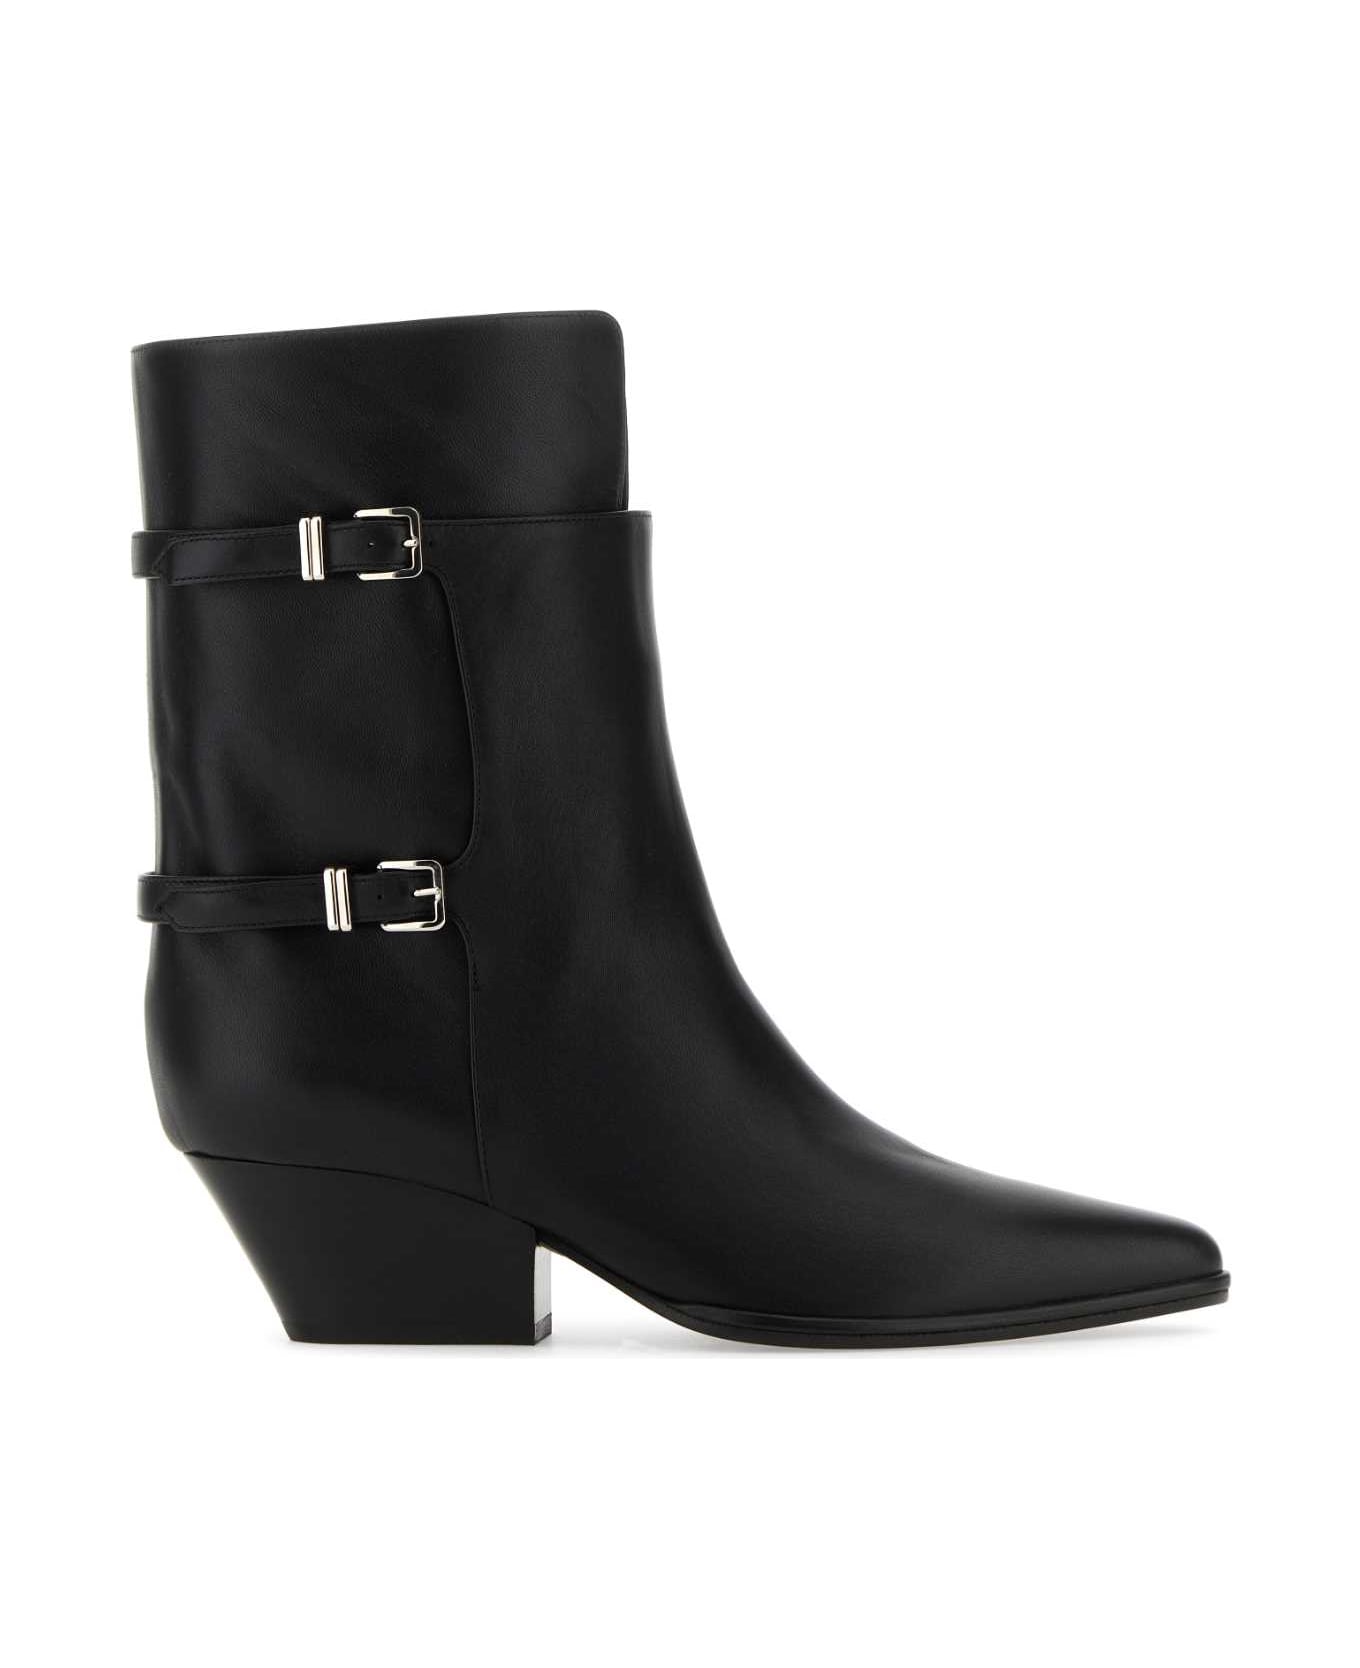 Sergio Rossi Black Leather Thalestris Ankle Boots - 1000